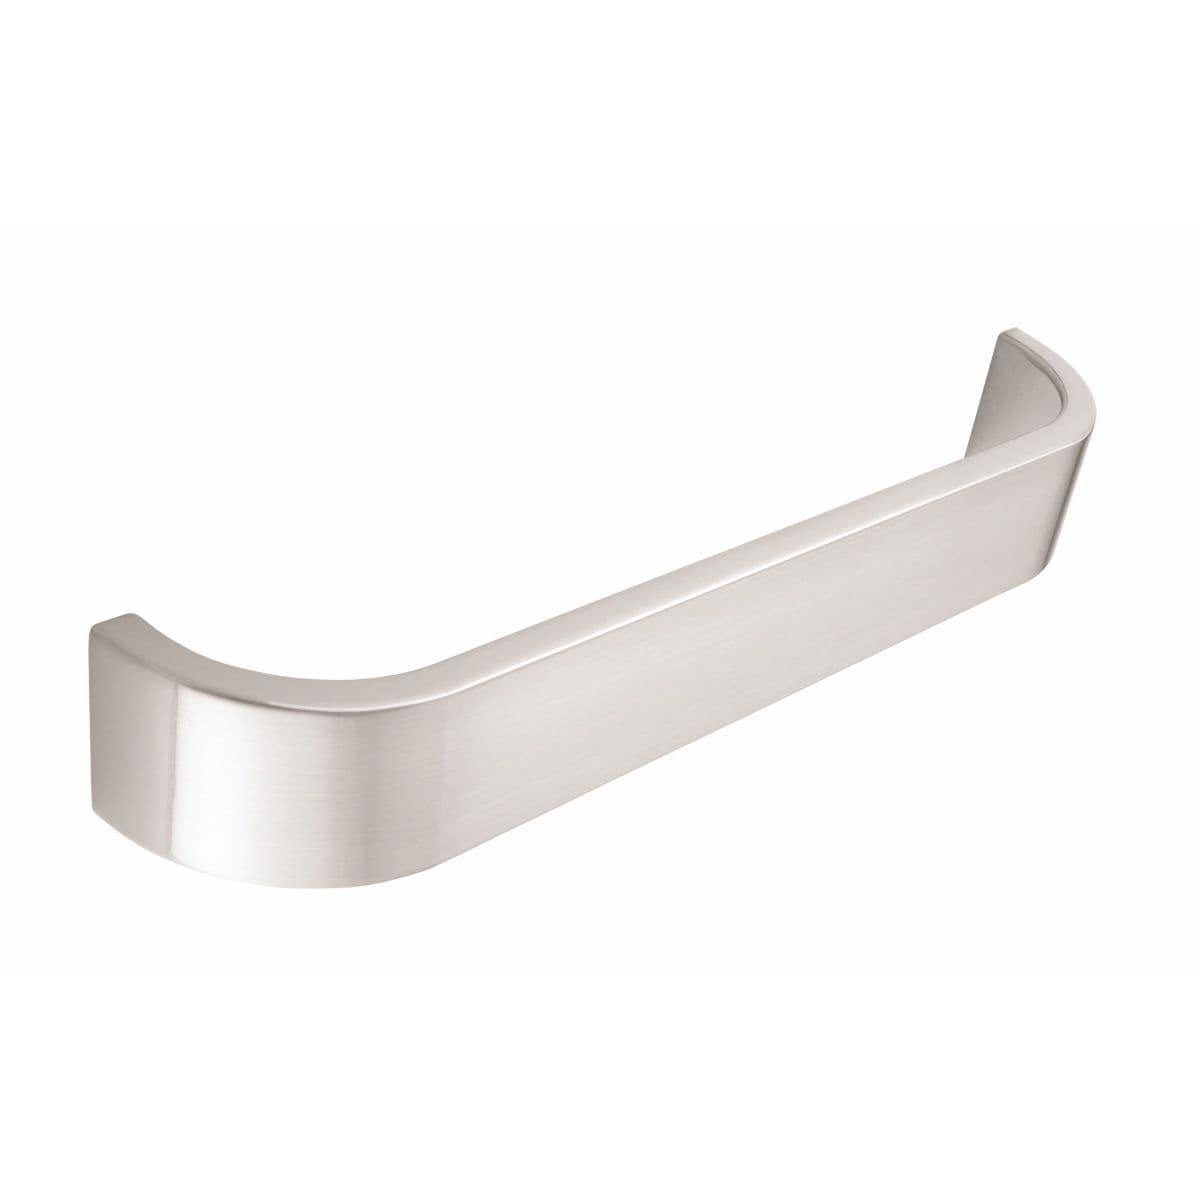 KELD D Cupboard Handle - 224mm h/c size - BRUSHED STAINLESS STEEL EFFECT finish (PWS H721.224.SS)